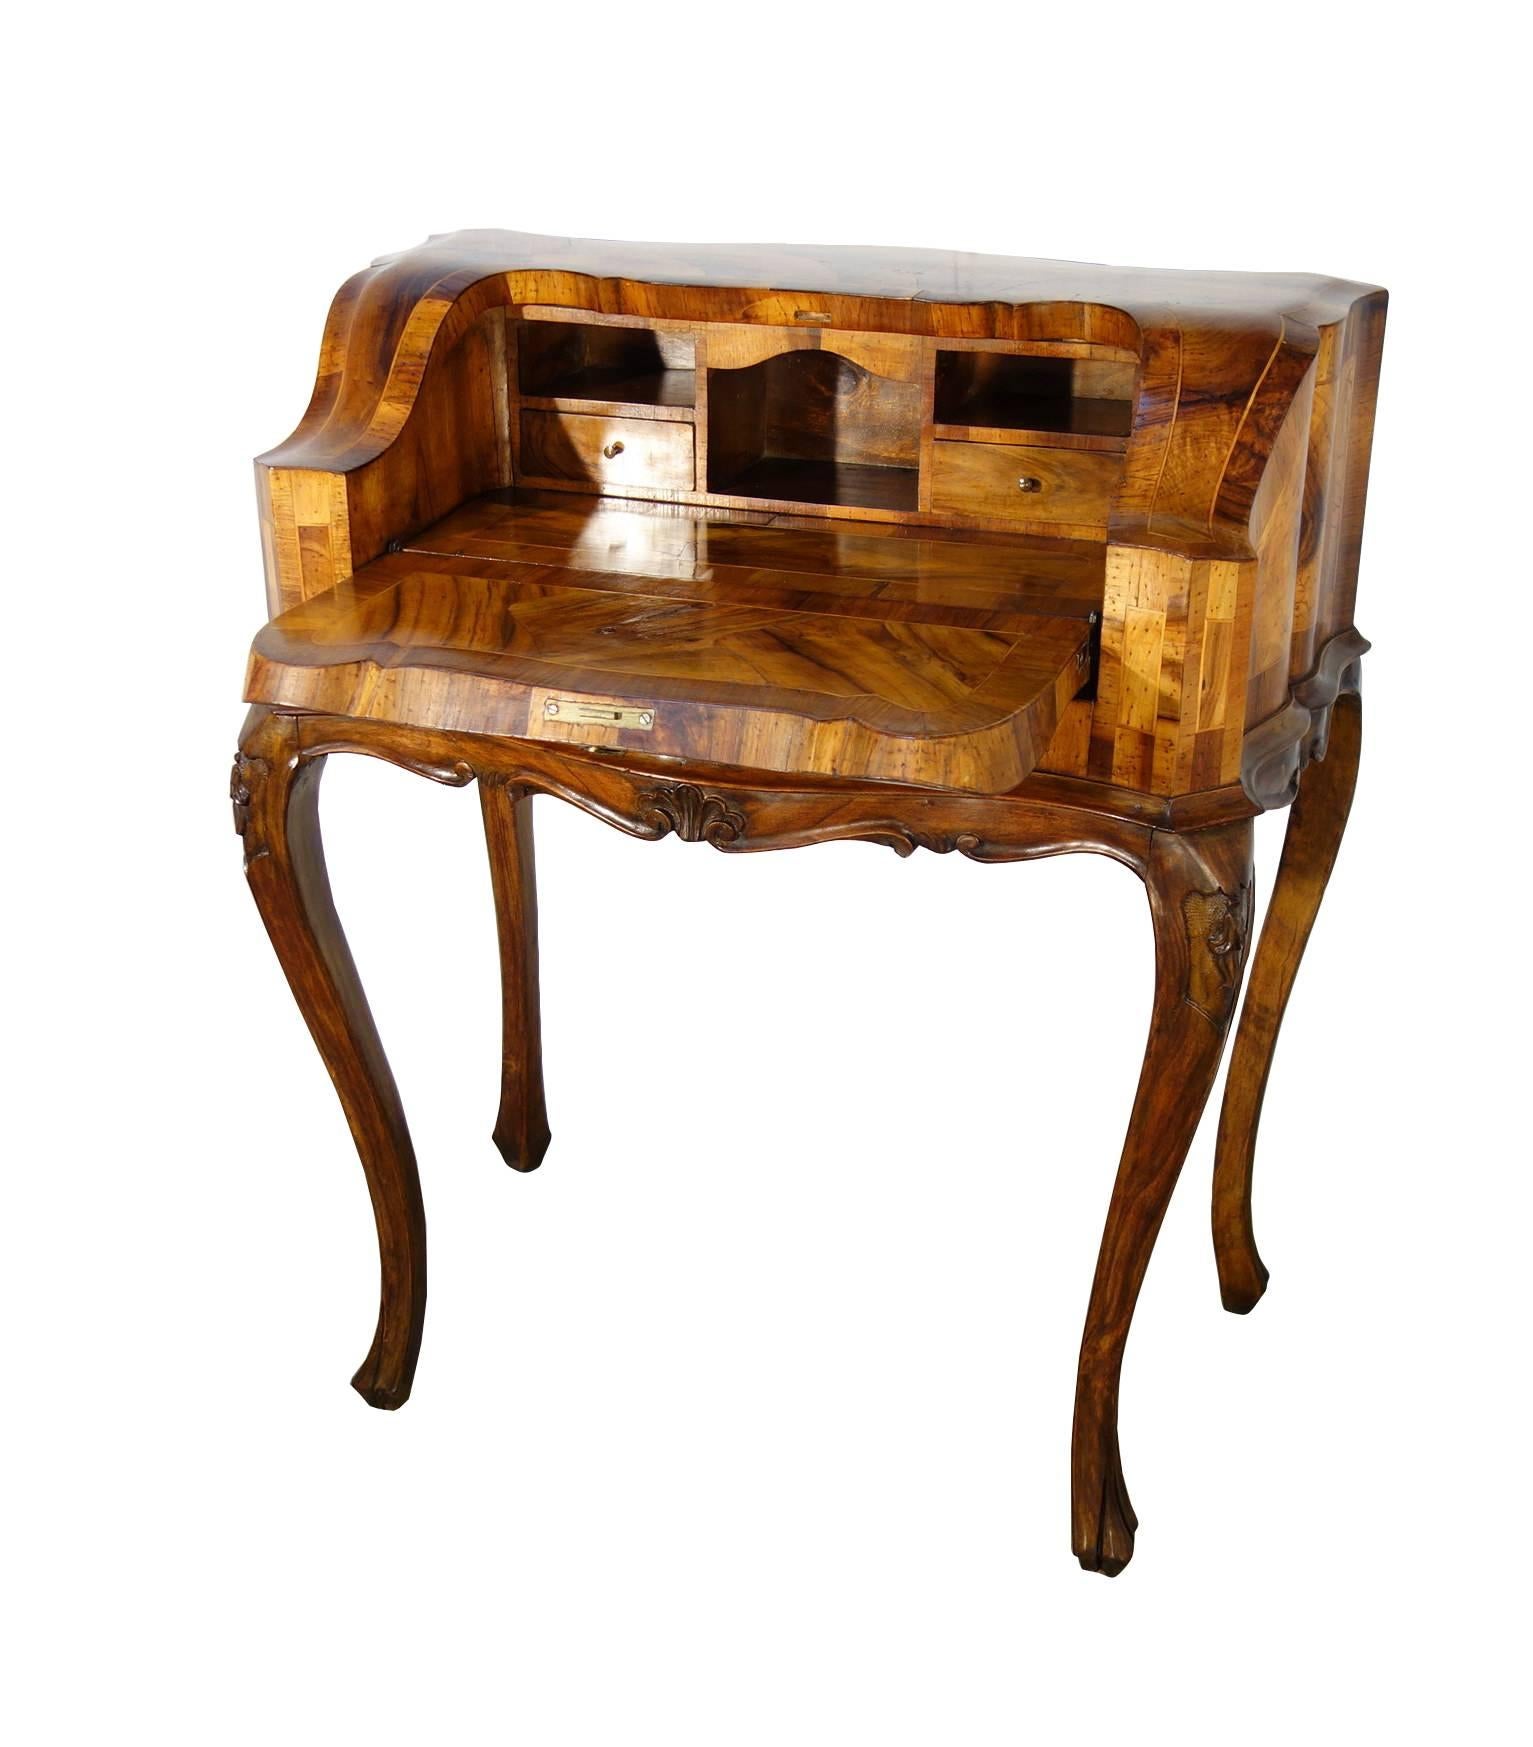 Venetian, Louis XV style, serpentine shape, lady desk; beautiful end-cut walnut burled veneer; cabriole legs; drop front opens concealing two little drawers and compartments.